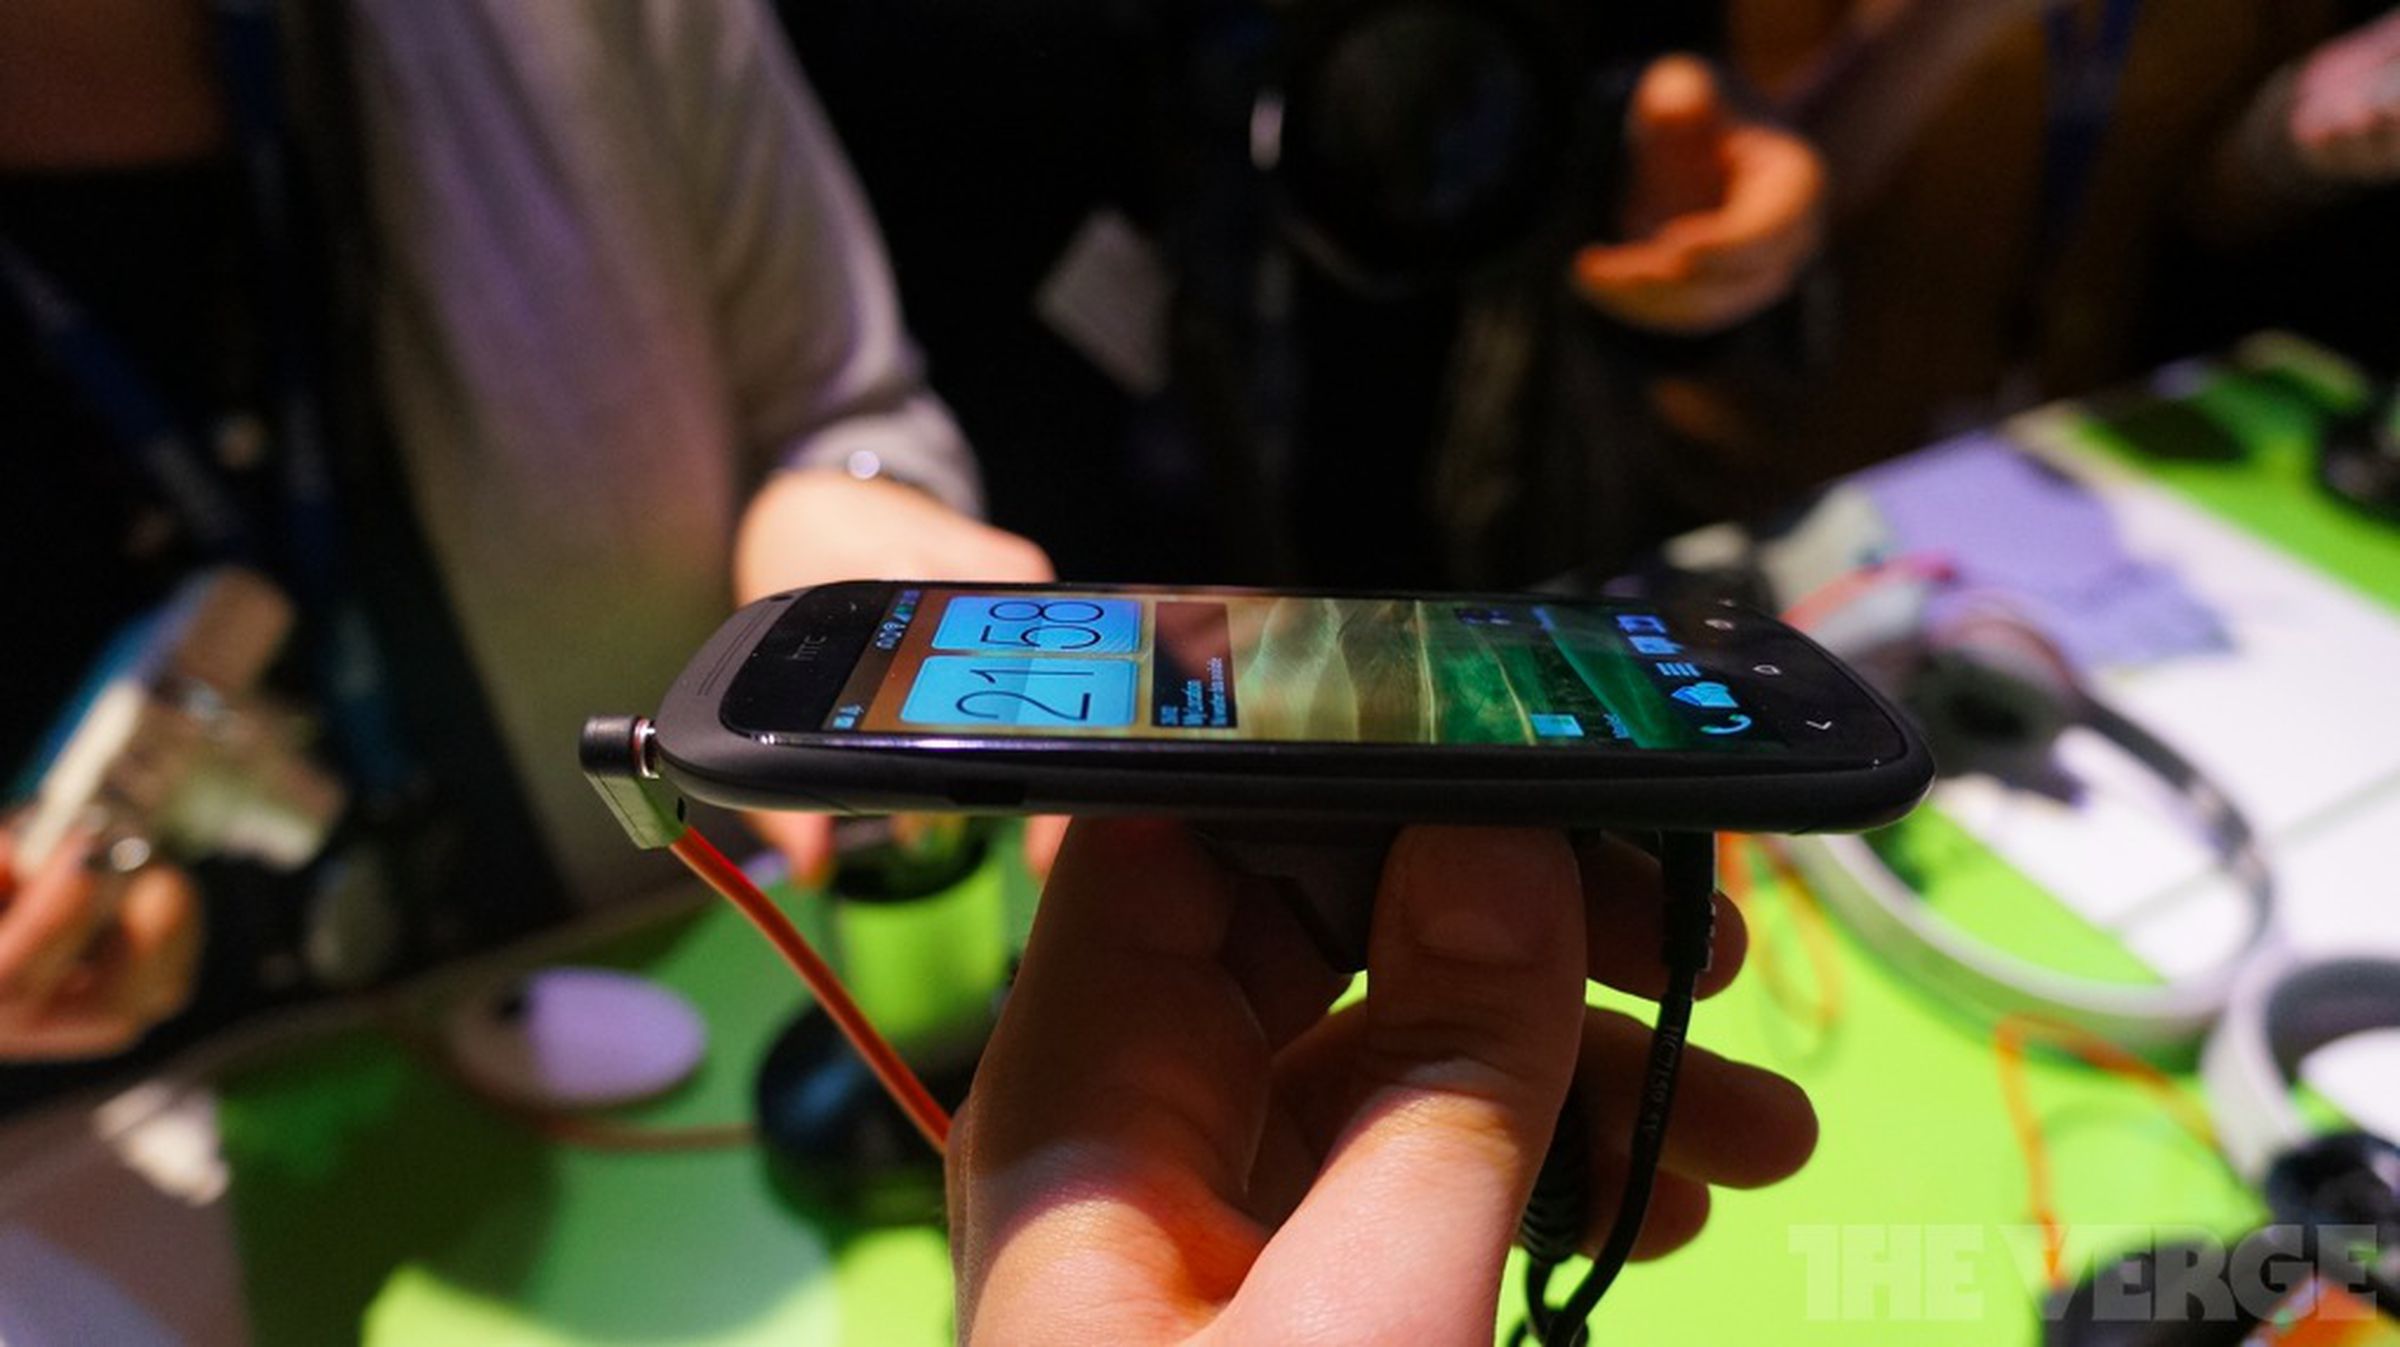 HTC One S hands-on photos